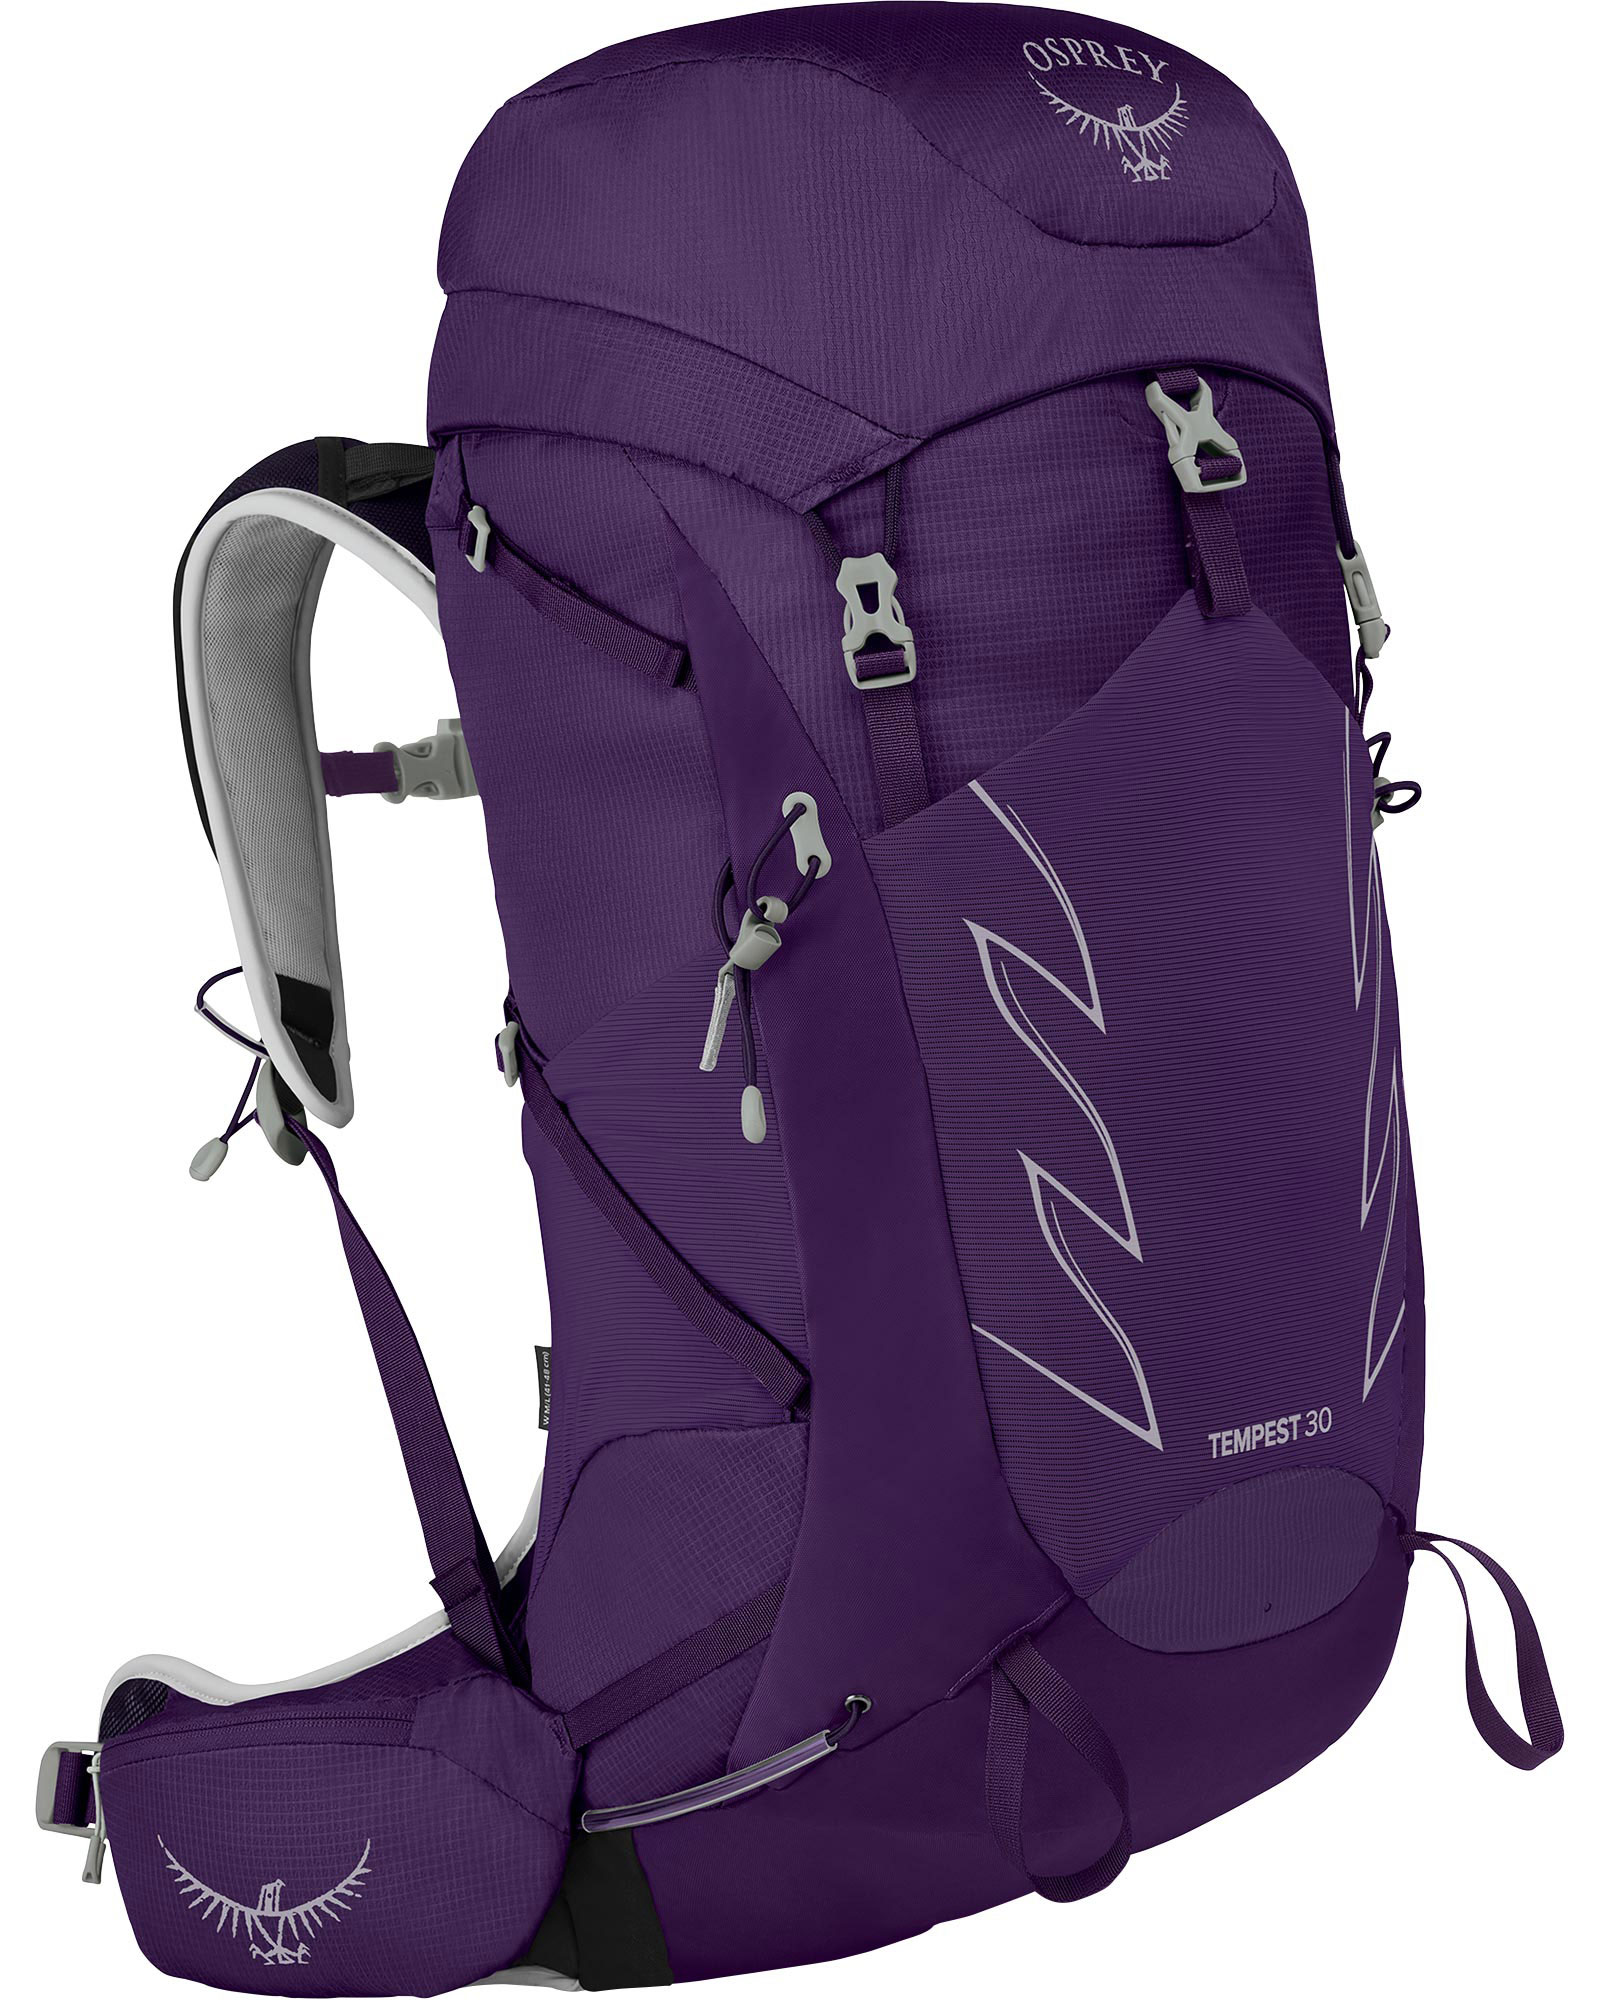 Osprey Tempest 30 Women’s Backpack - Violac Purple XS/S